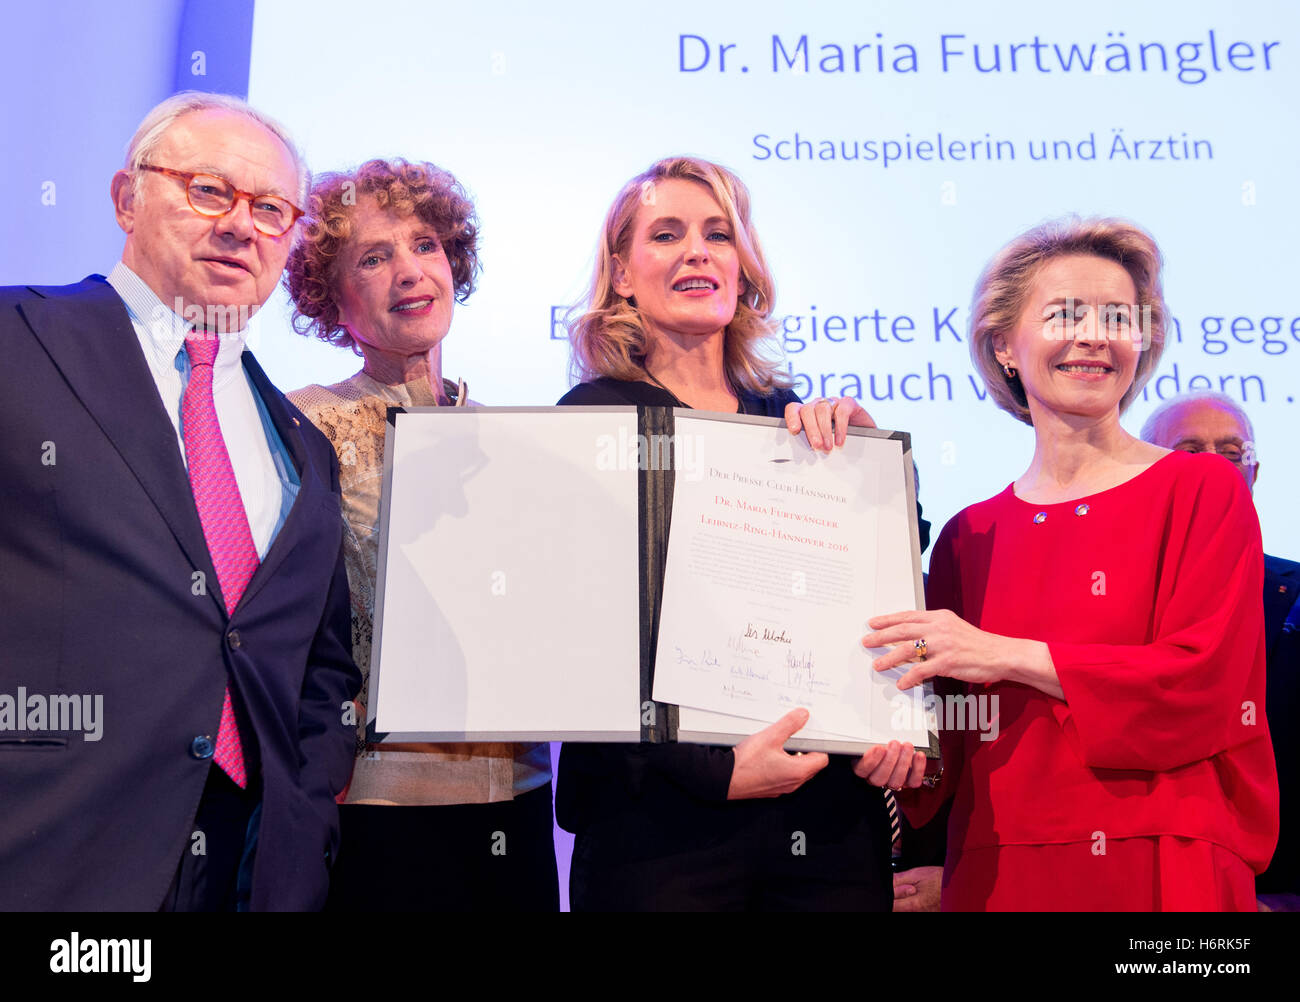 German actress Maria Furtwaengler (C) with her husband, publisher Hubert Burda (L), her mother Kathrin Ackermann (2-L) and Minster for Defence Ursula von der Leyen (R) after receiving the Leibinz Ring, an award for special achievements awarded by the Press Club Hanover since 1997, in Hanover, Germany, 31 October 2016. Furtwaengler received the award for her work for the prevention of violence against children. The original ring, made especially for Furtwaengler, was stolen. Furtwaengler was presented with a hastily made replica of the original. Photo: Hauke-Christian Dittrich/dpa Stock Photo